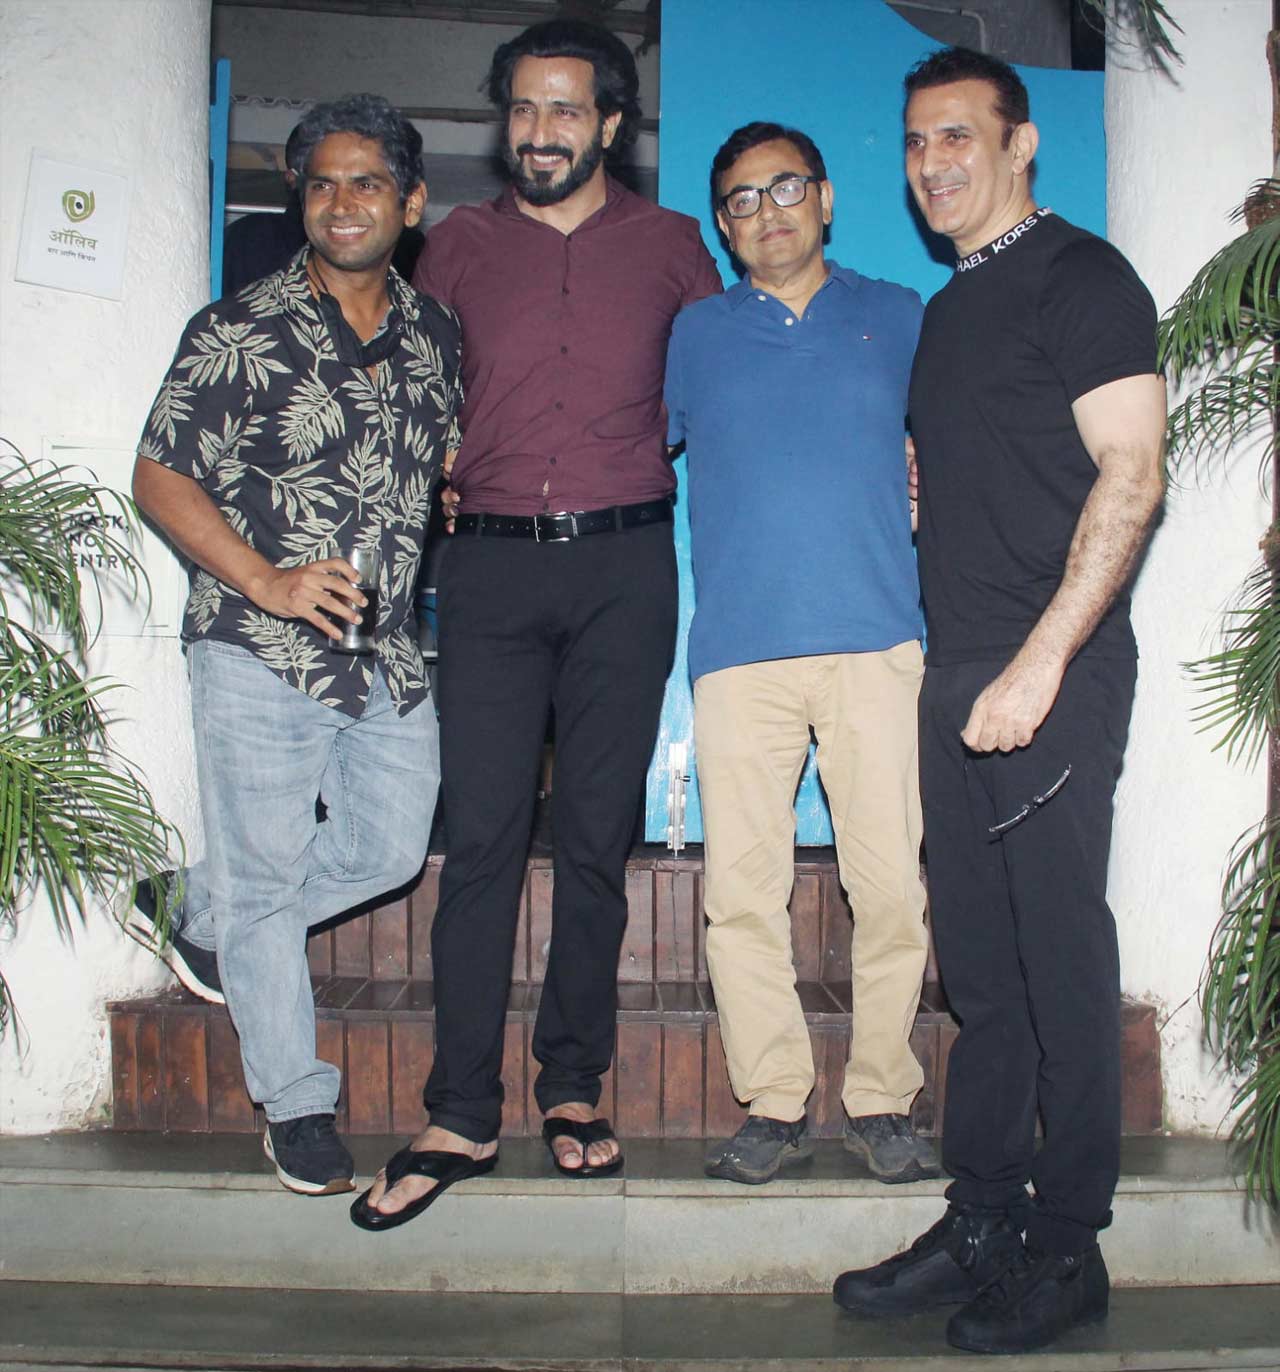 Team Mission Majnu was snapped partying together at a popular restaurant in Bandra, Mumbai.